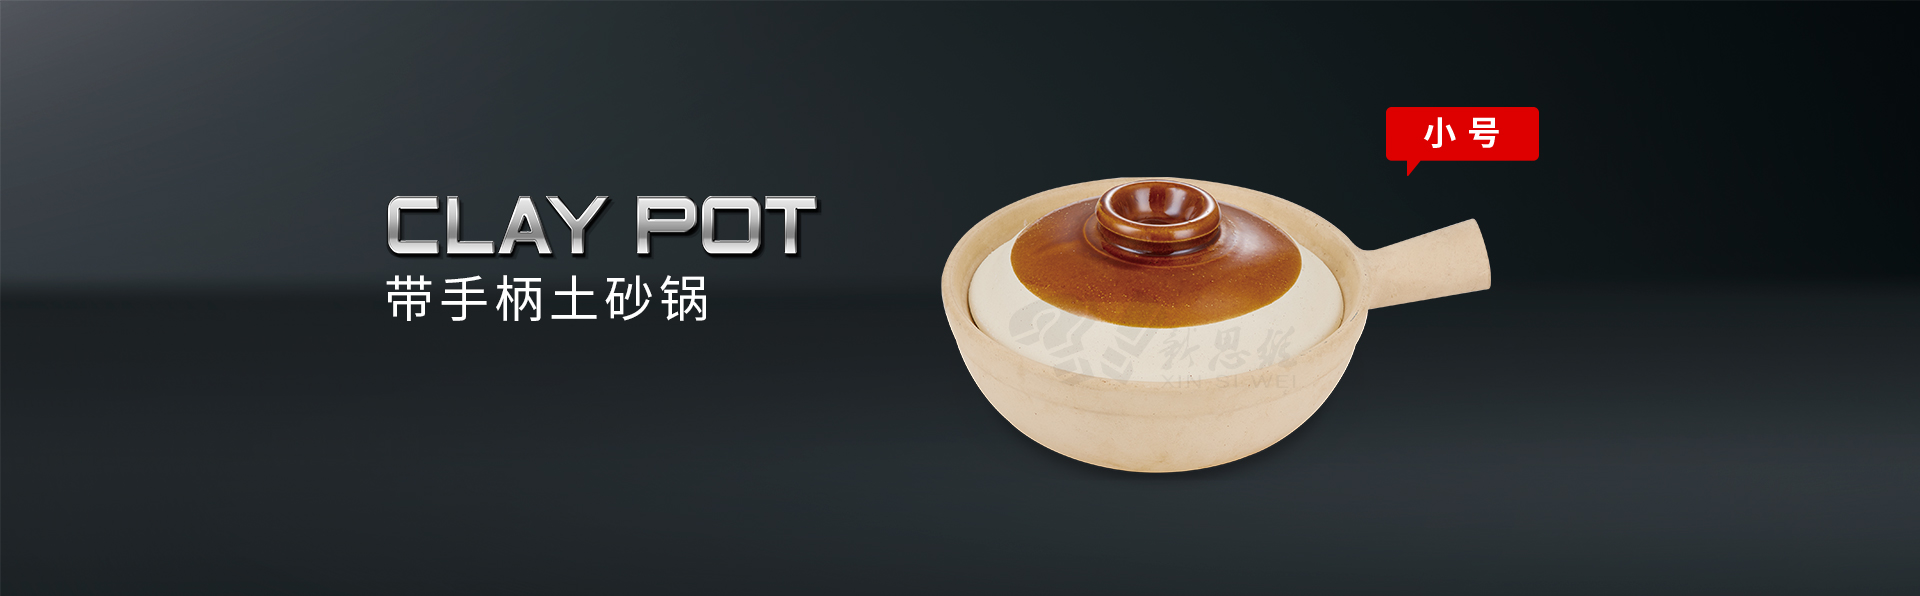 xinsiwei_supporing_materials_small_clay_pot_with_handle_details_page.jpg